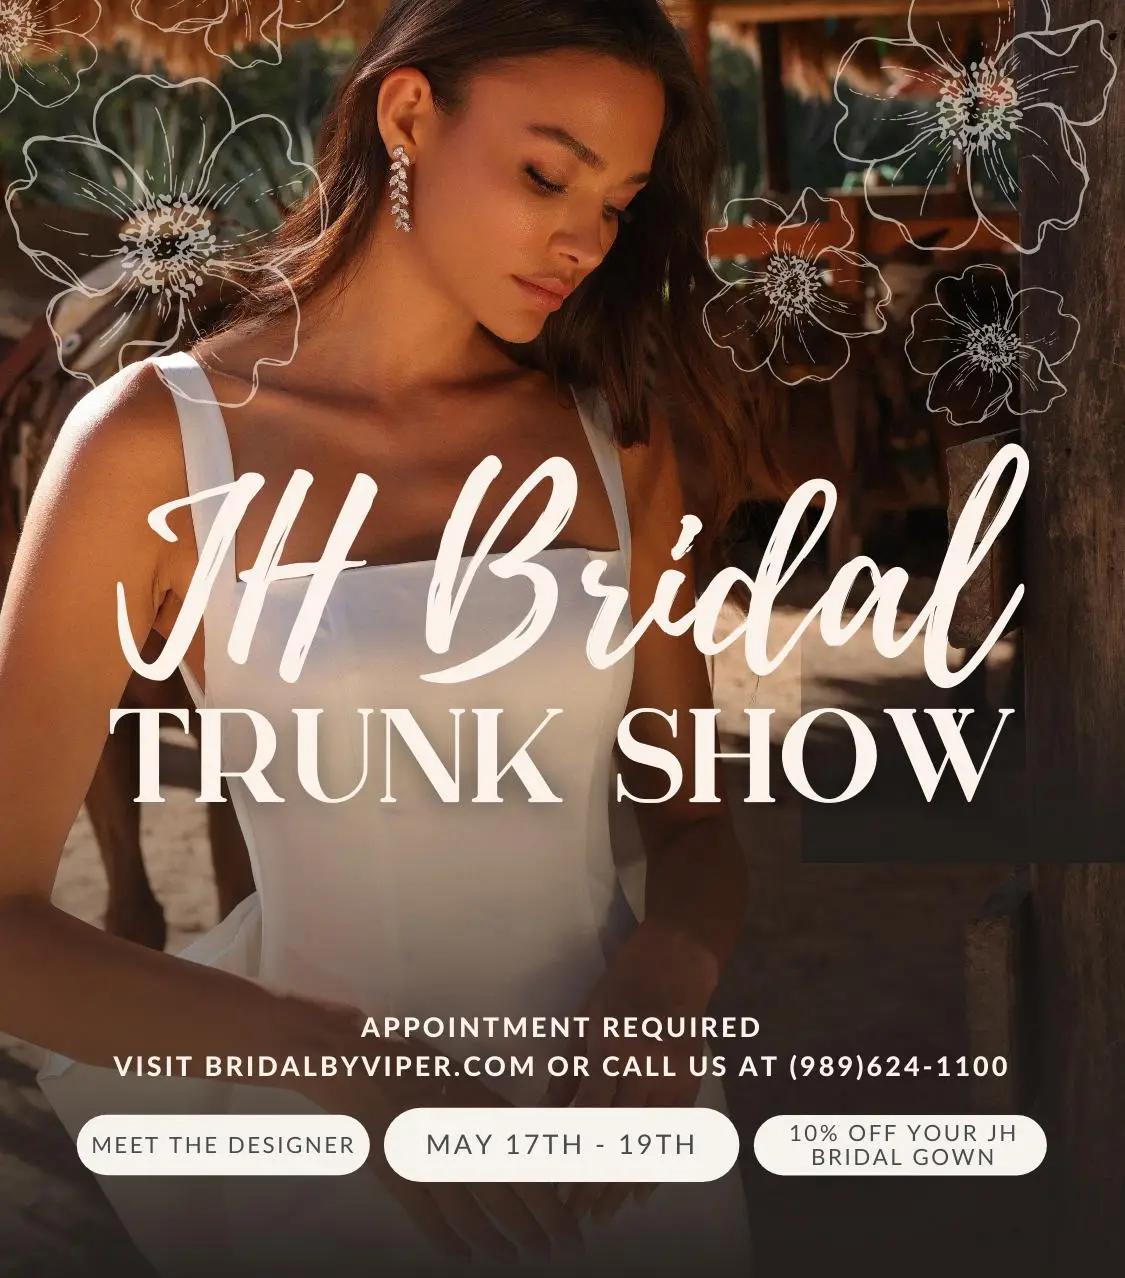 JH Bridal Trunk Show mobile banner